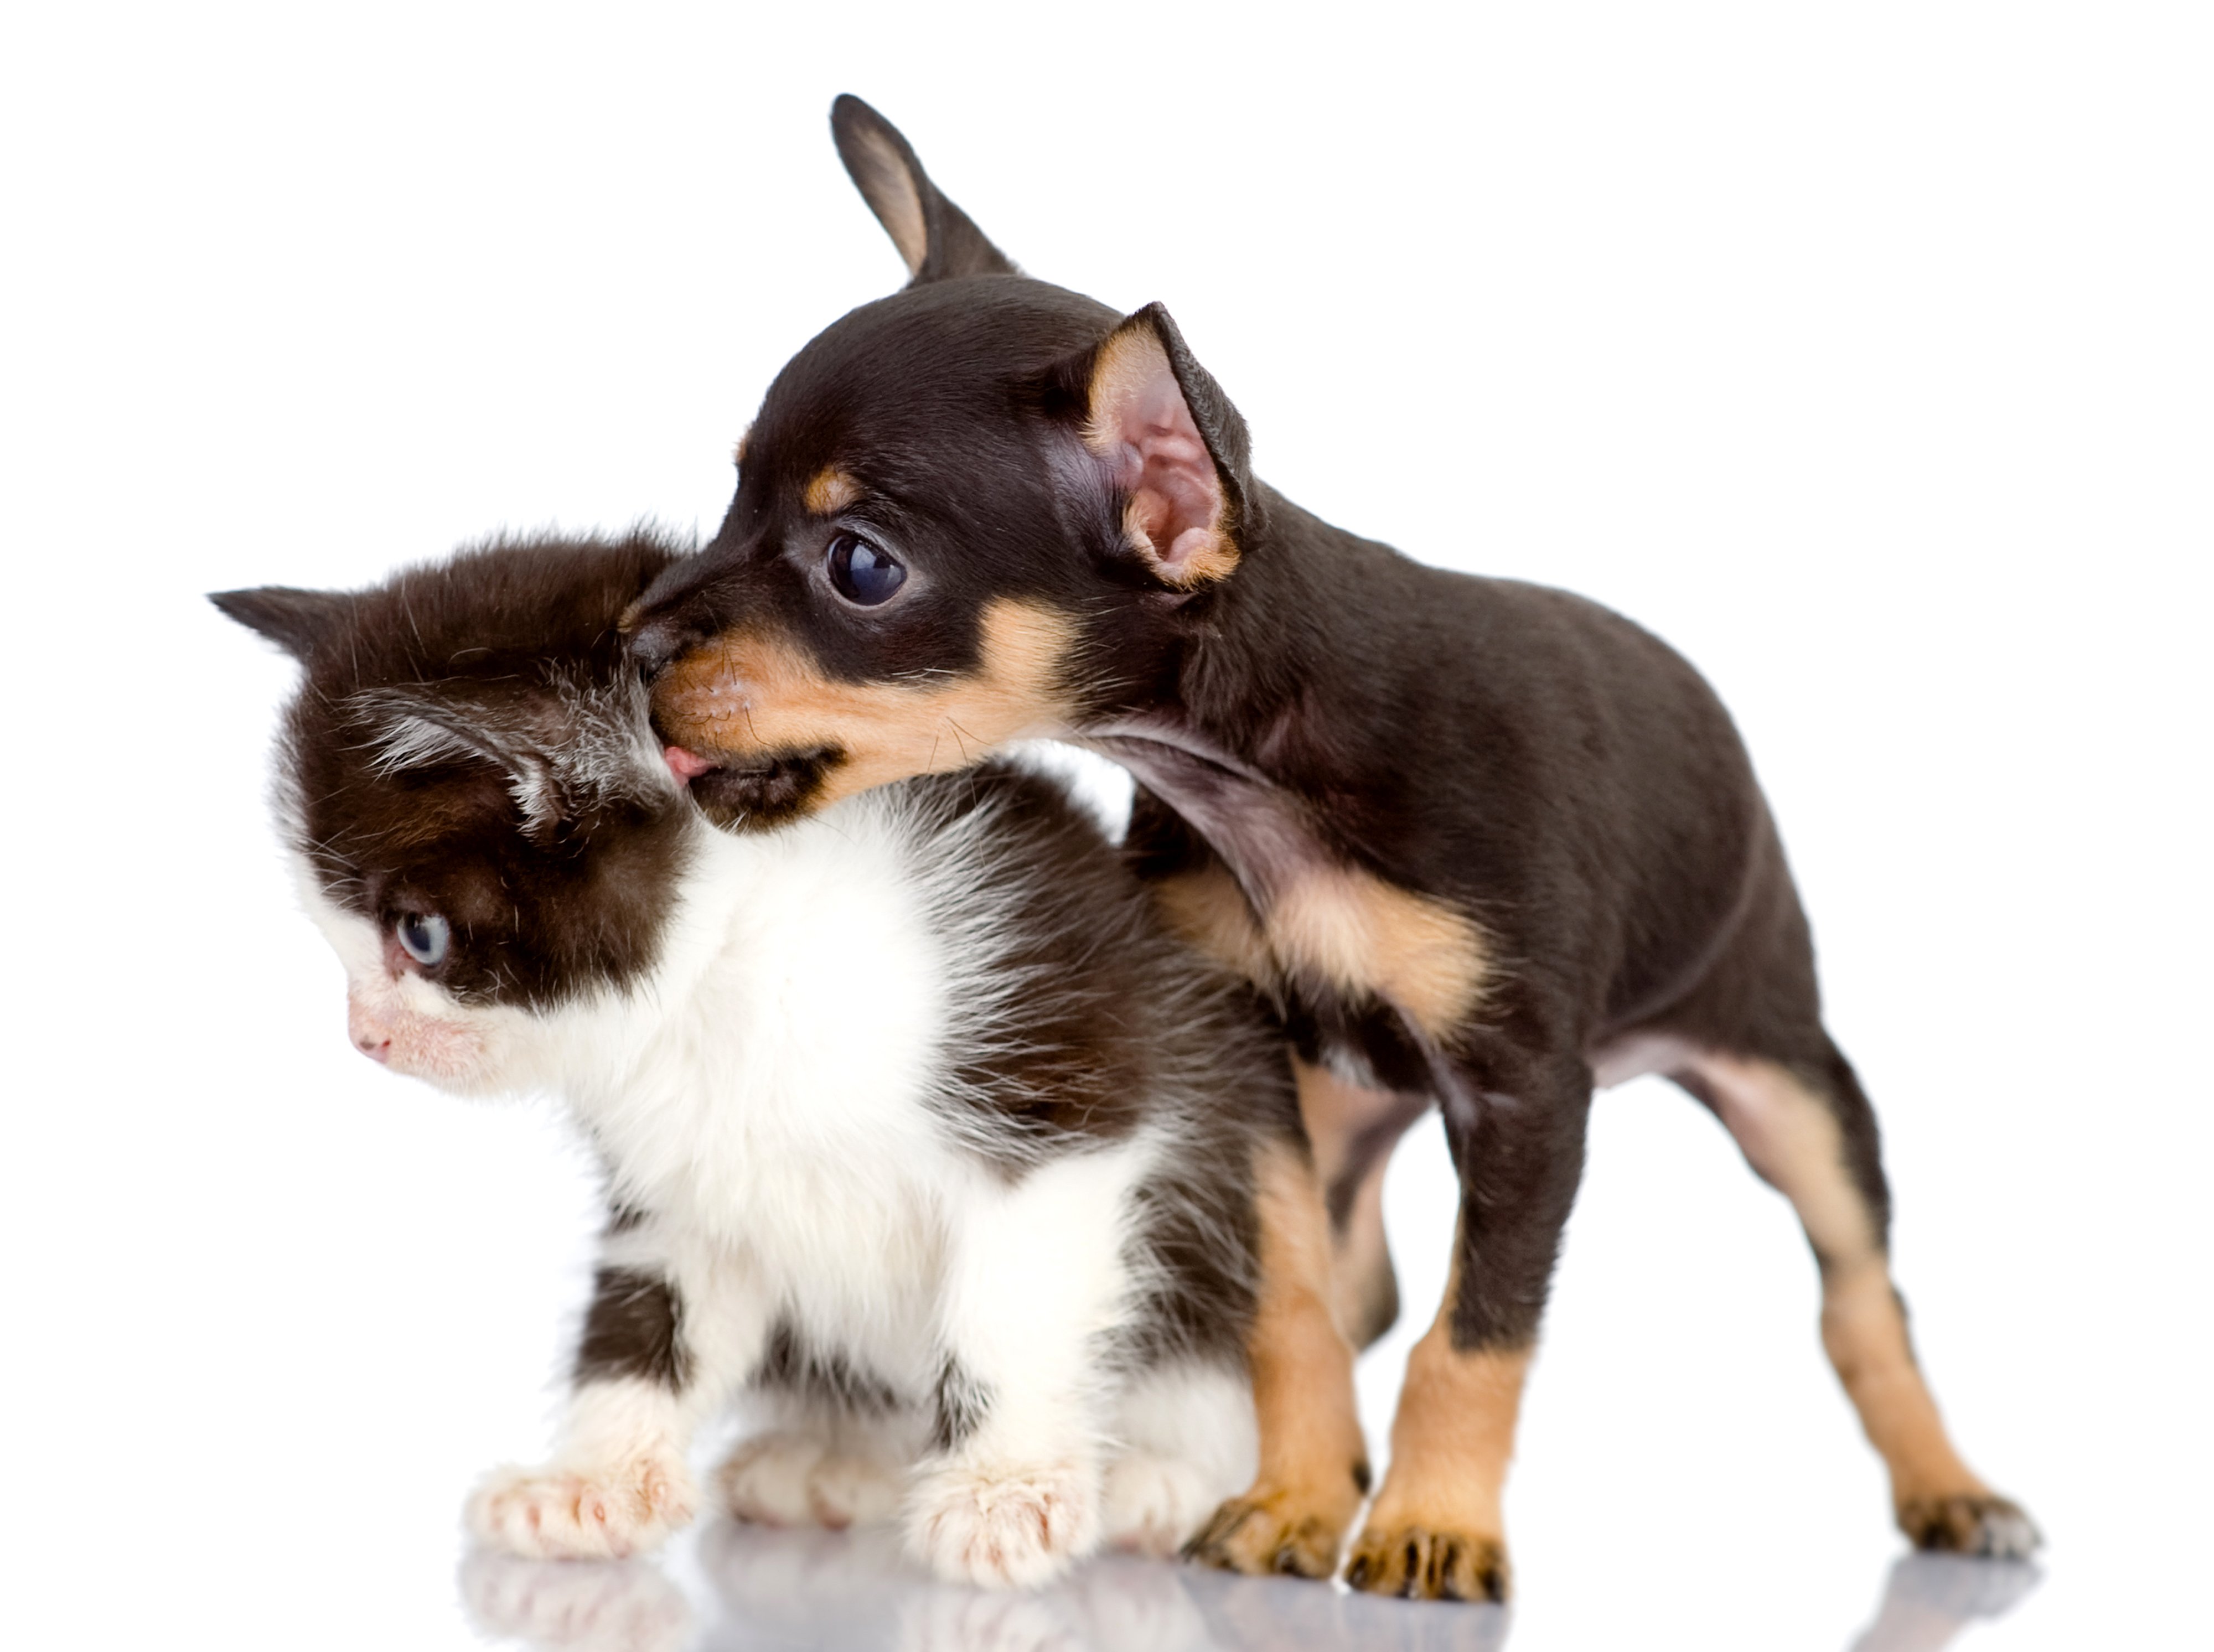 dogs, Cats, Kitten, Puppy, Chihuahua, Baby Wallpaper